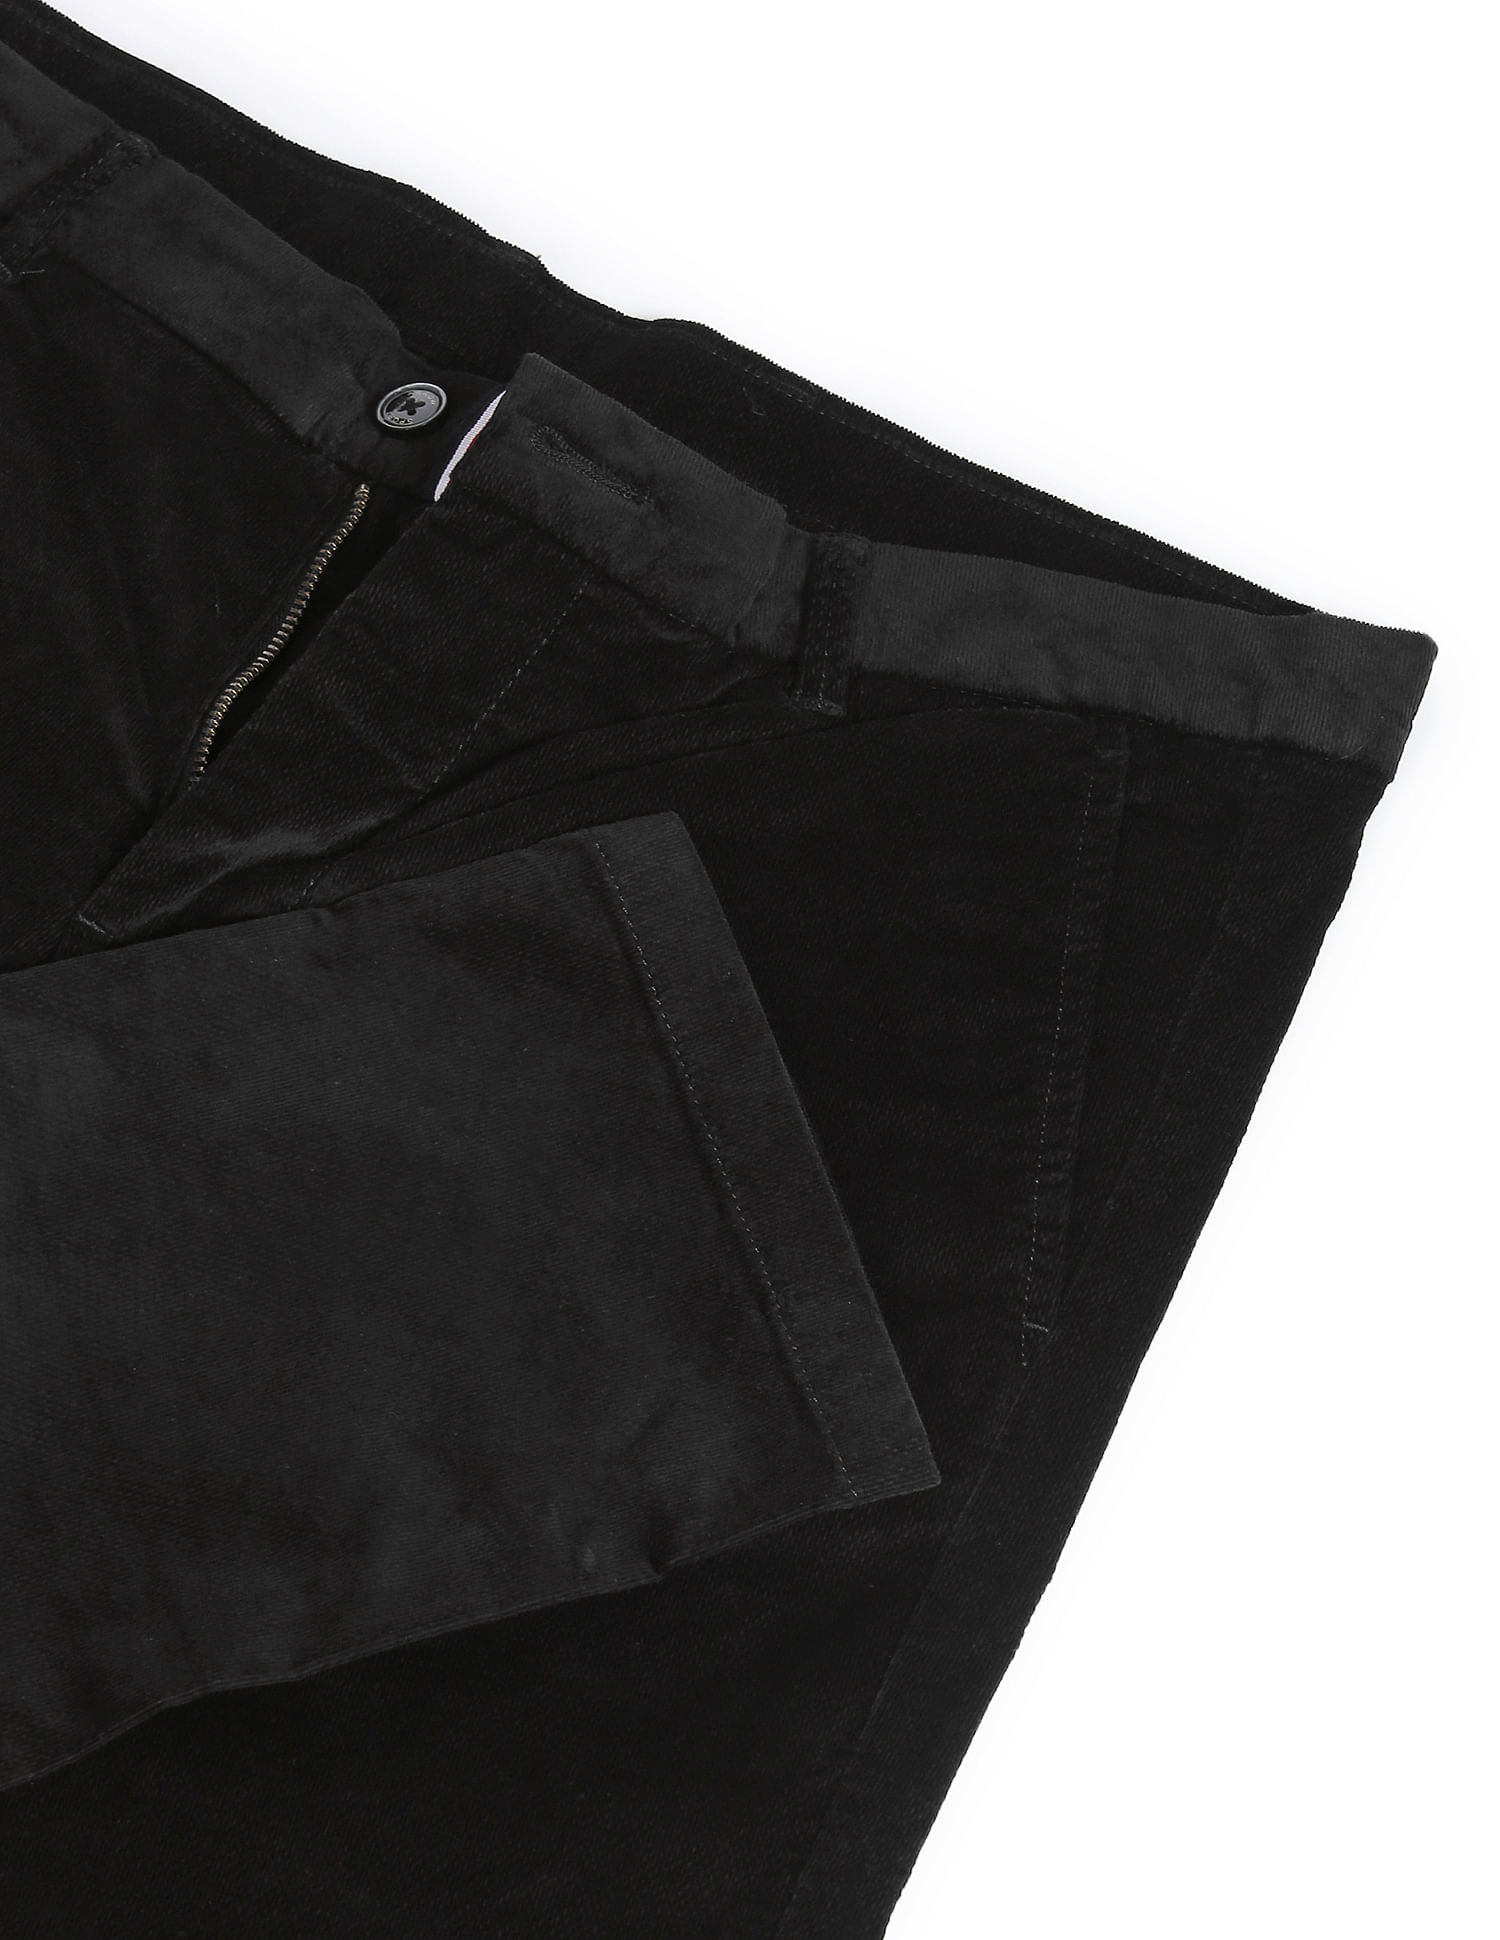 Black Corduroy Trousers : Made To Measure Custom Jeans For Men & Women,  MakeYourOwnJeans®